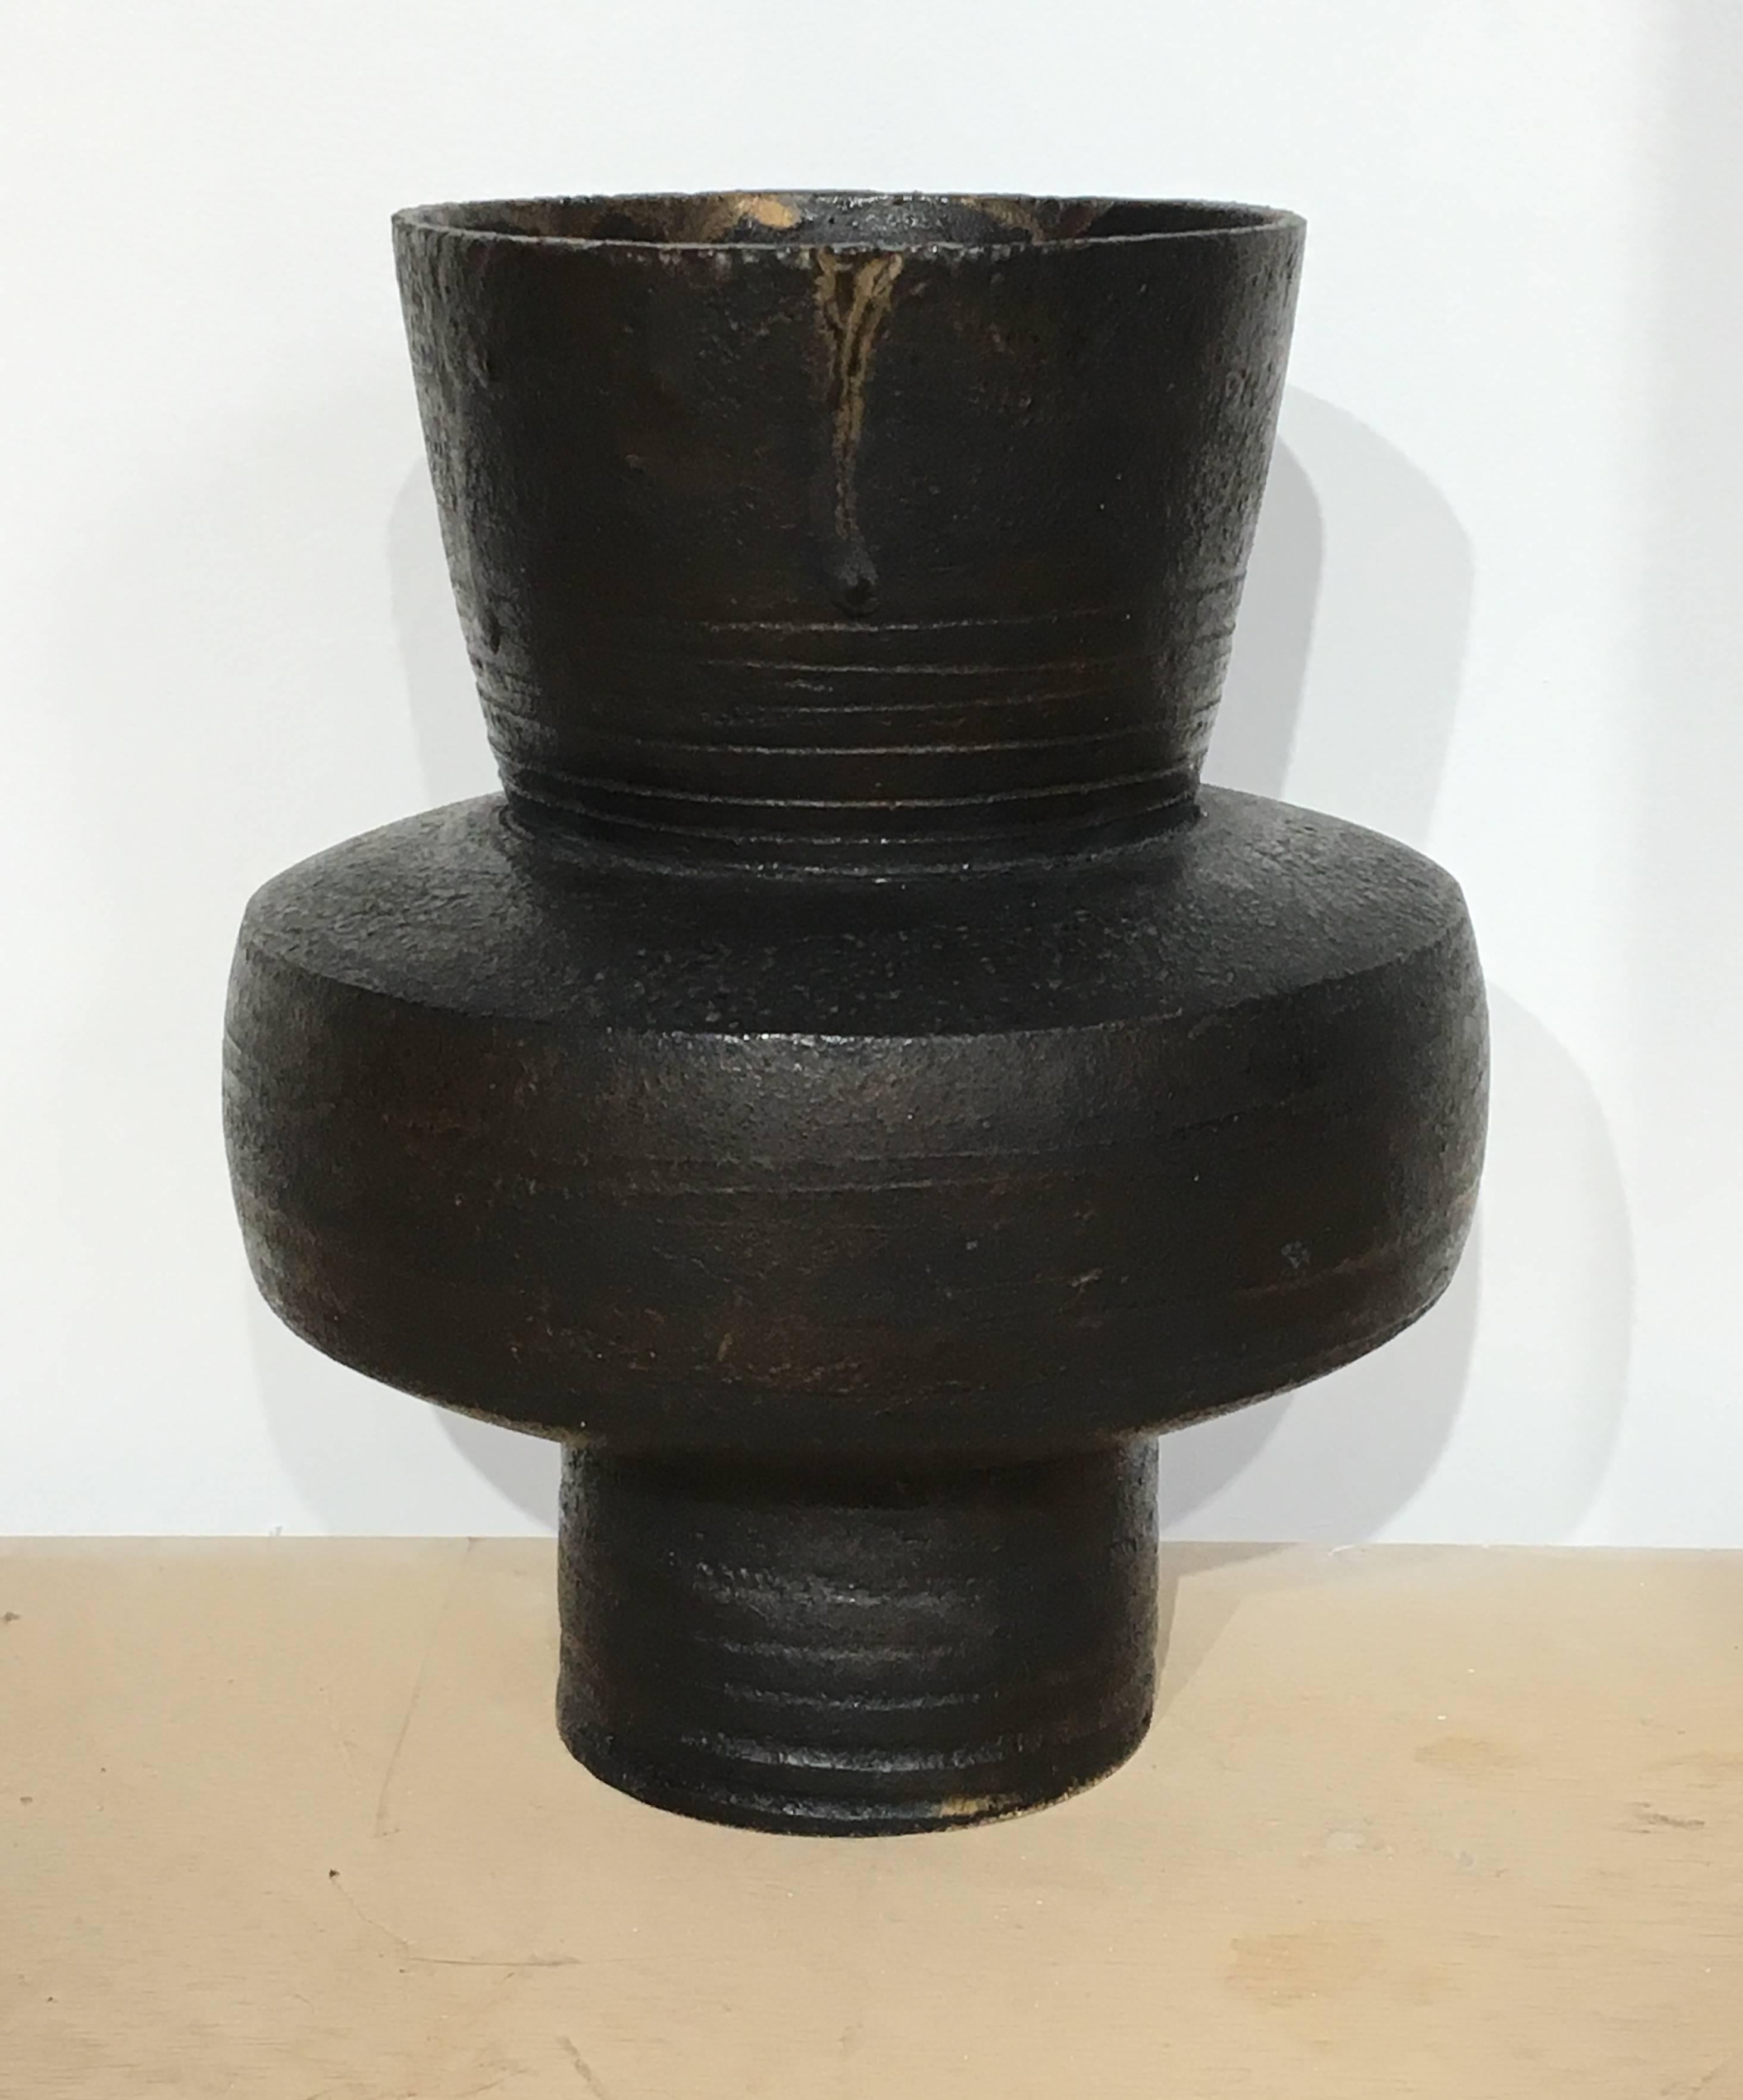 Hans Coper was an influential German-born British studio potter. His work is often coupled with that of Lucie Rie due to their close association, even though their best known work differs dramatically, with Rie's being less sculptural, while Coper's